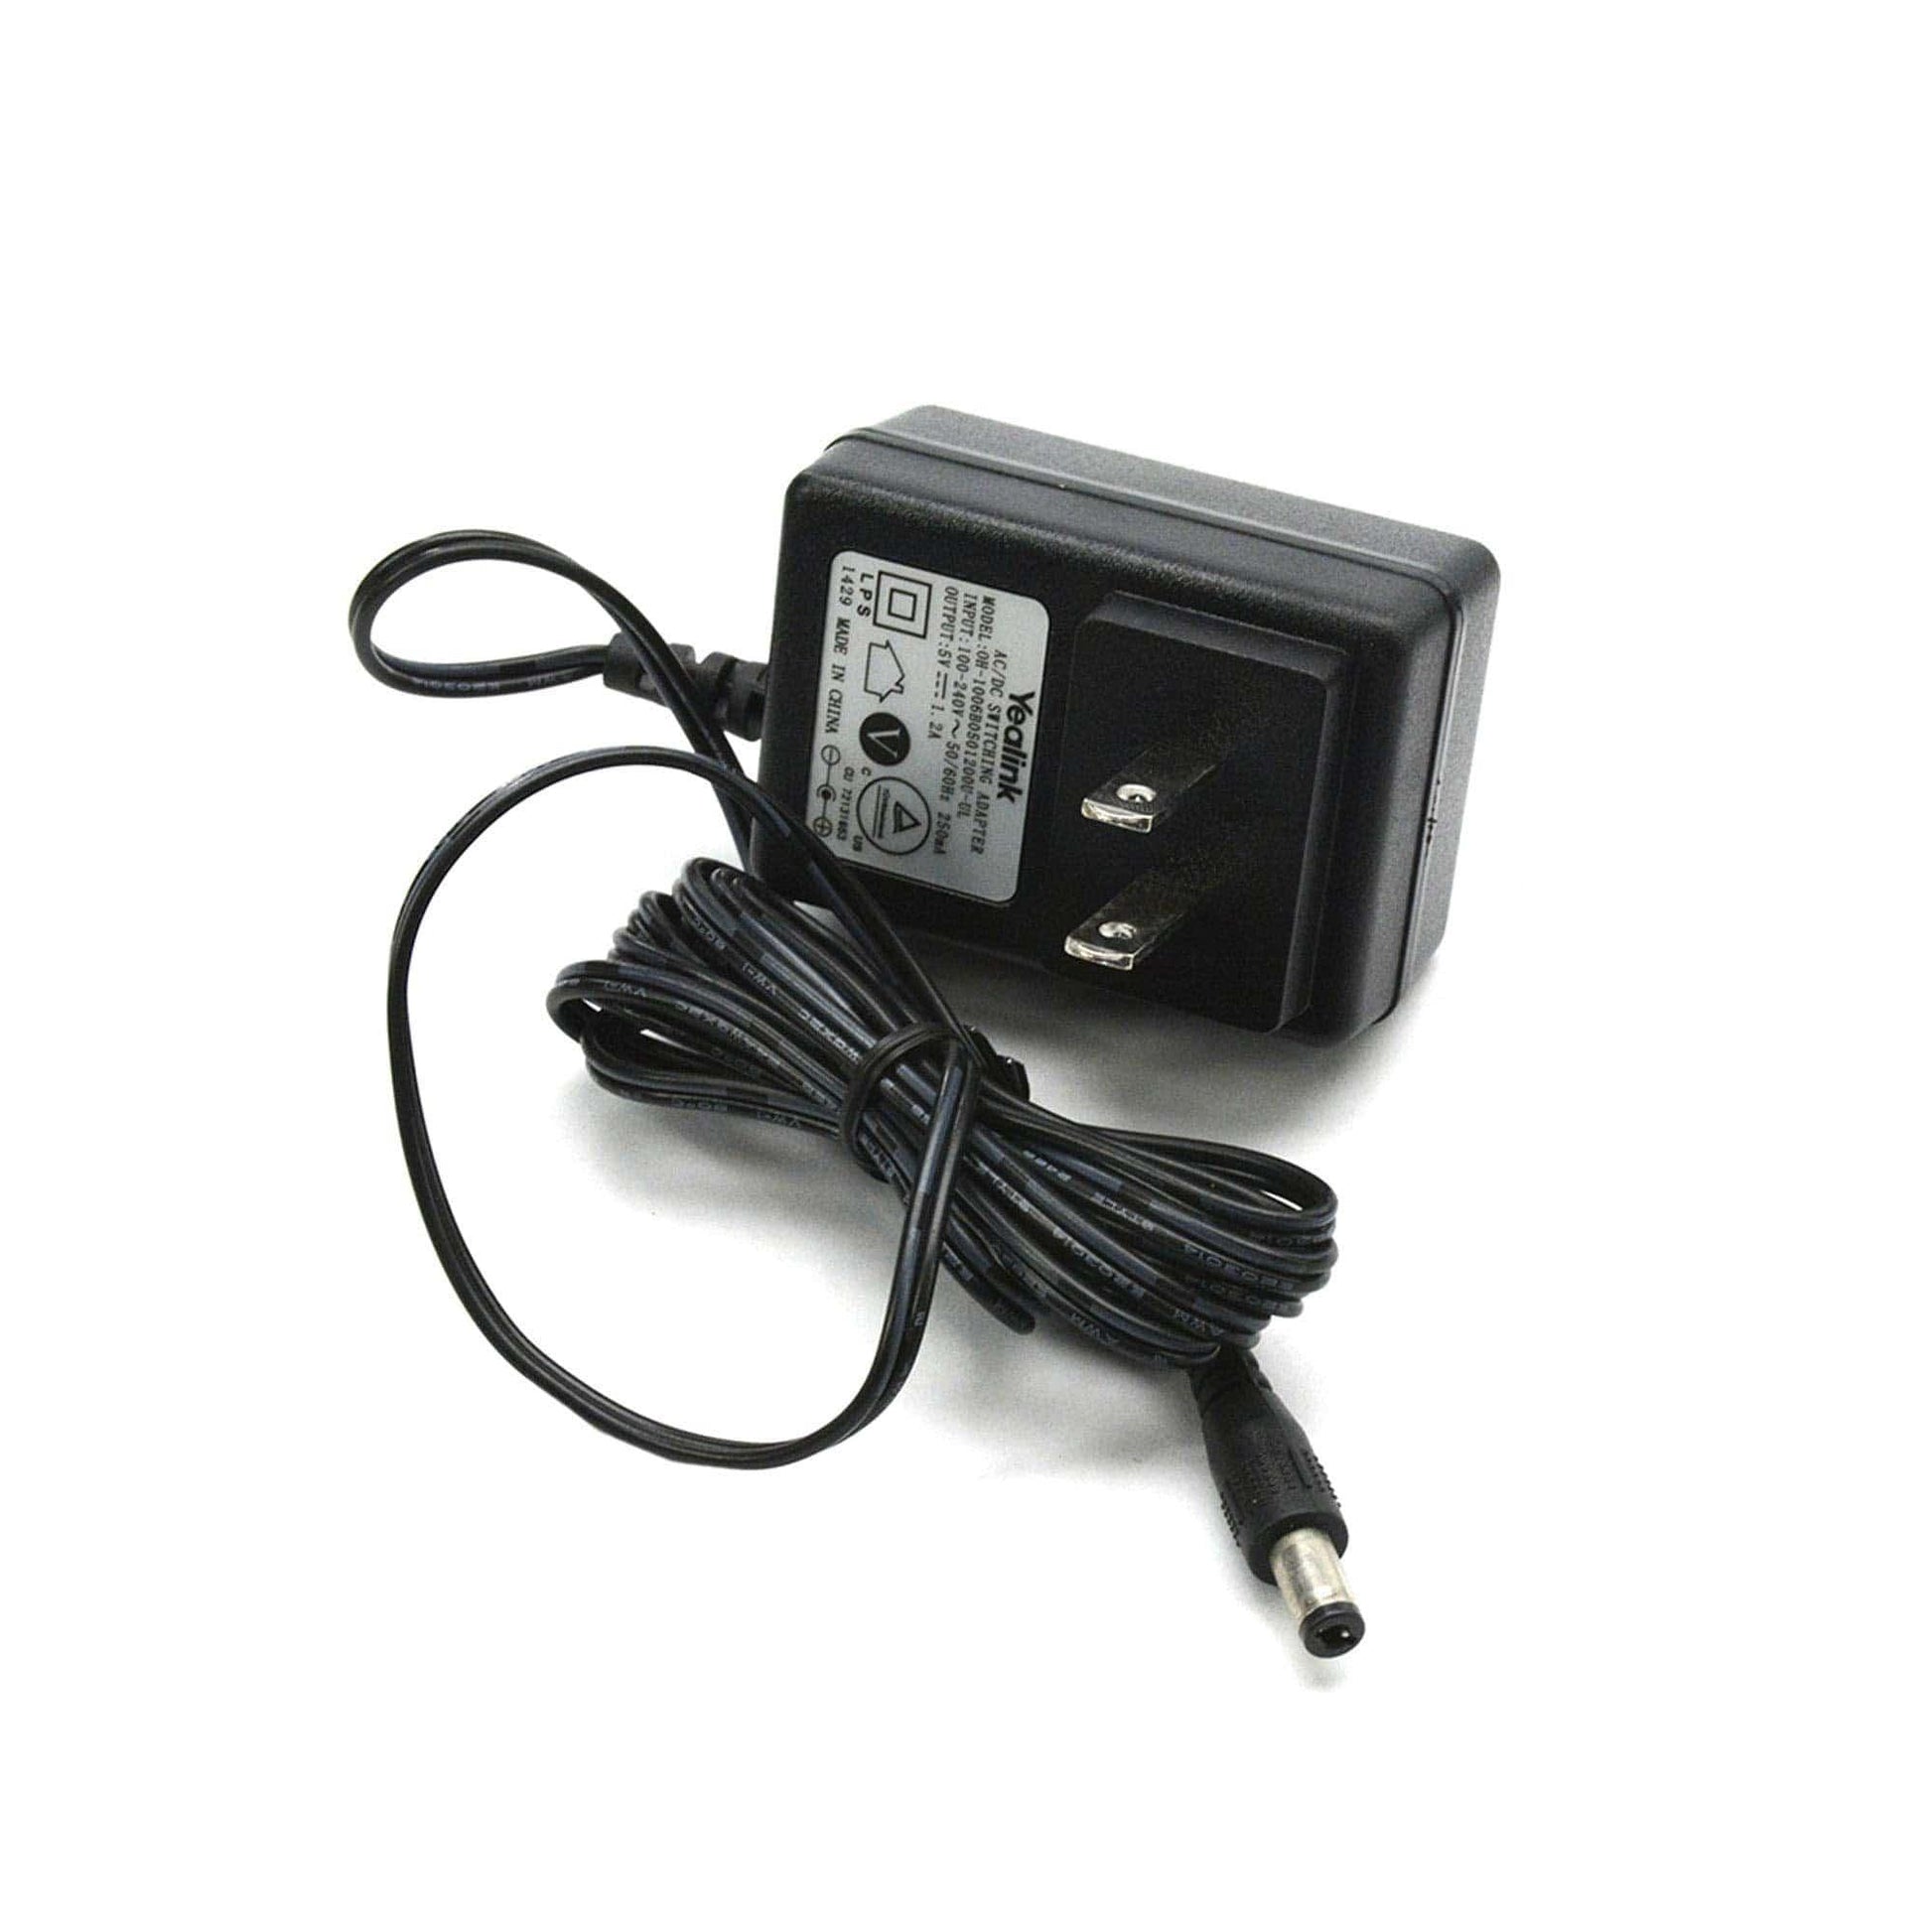 Yealink YLPS050600B1-US 5V 2A Power Adapter - YEALINK-PWR-5V - Reef Telecom